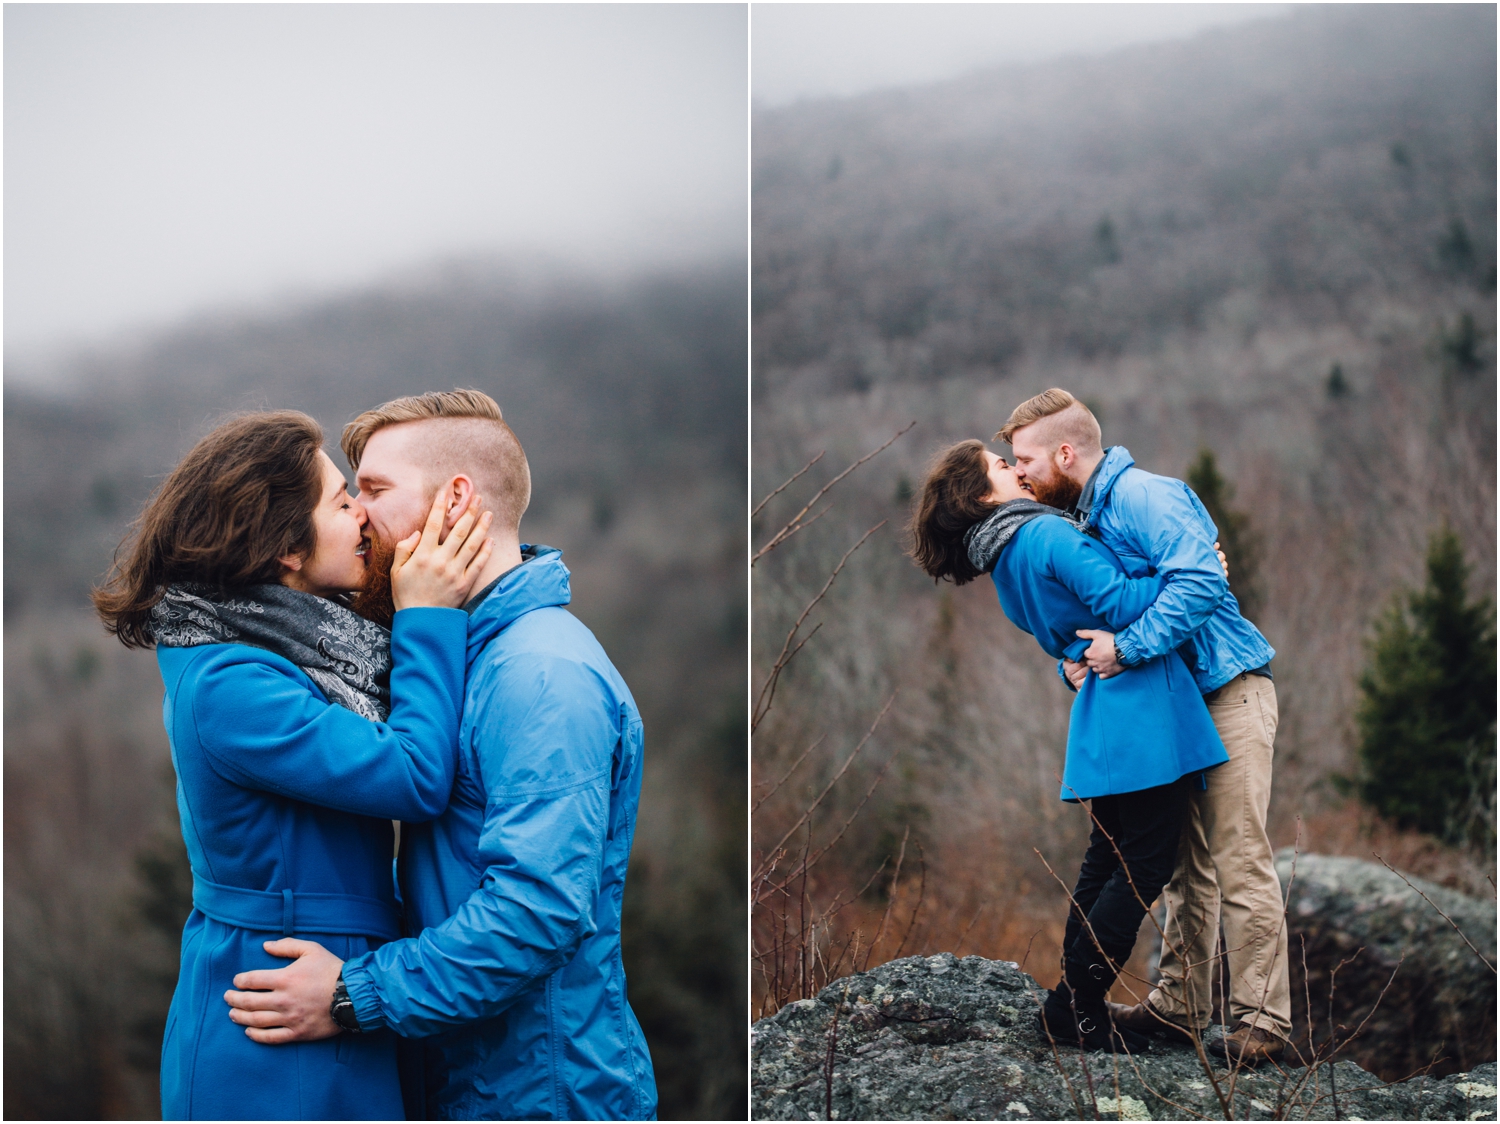 katy-sergent-photography-grayson-highlands-engagement-session-mouth-of-wilson-virginia-damascus-appalachian-trail-tennessee-wedding-elopement_0024.jpg